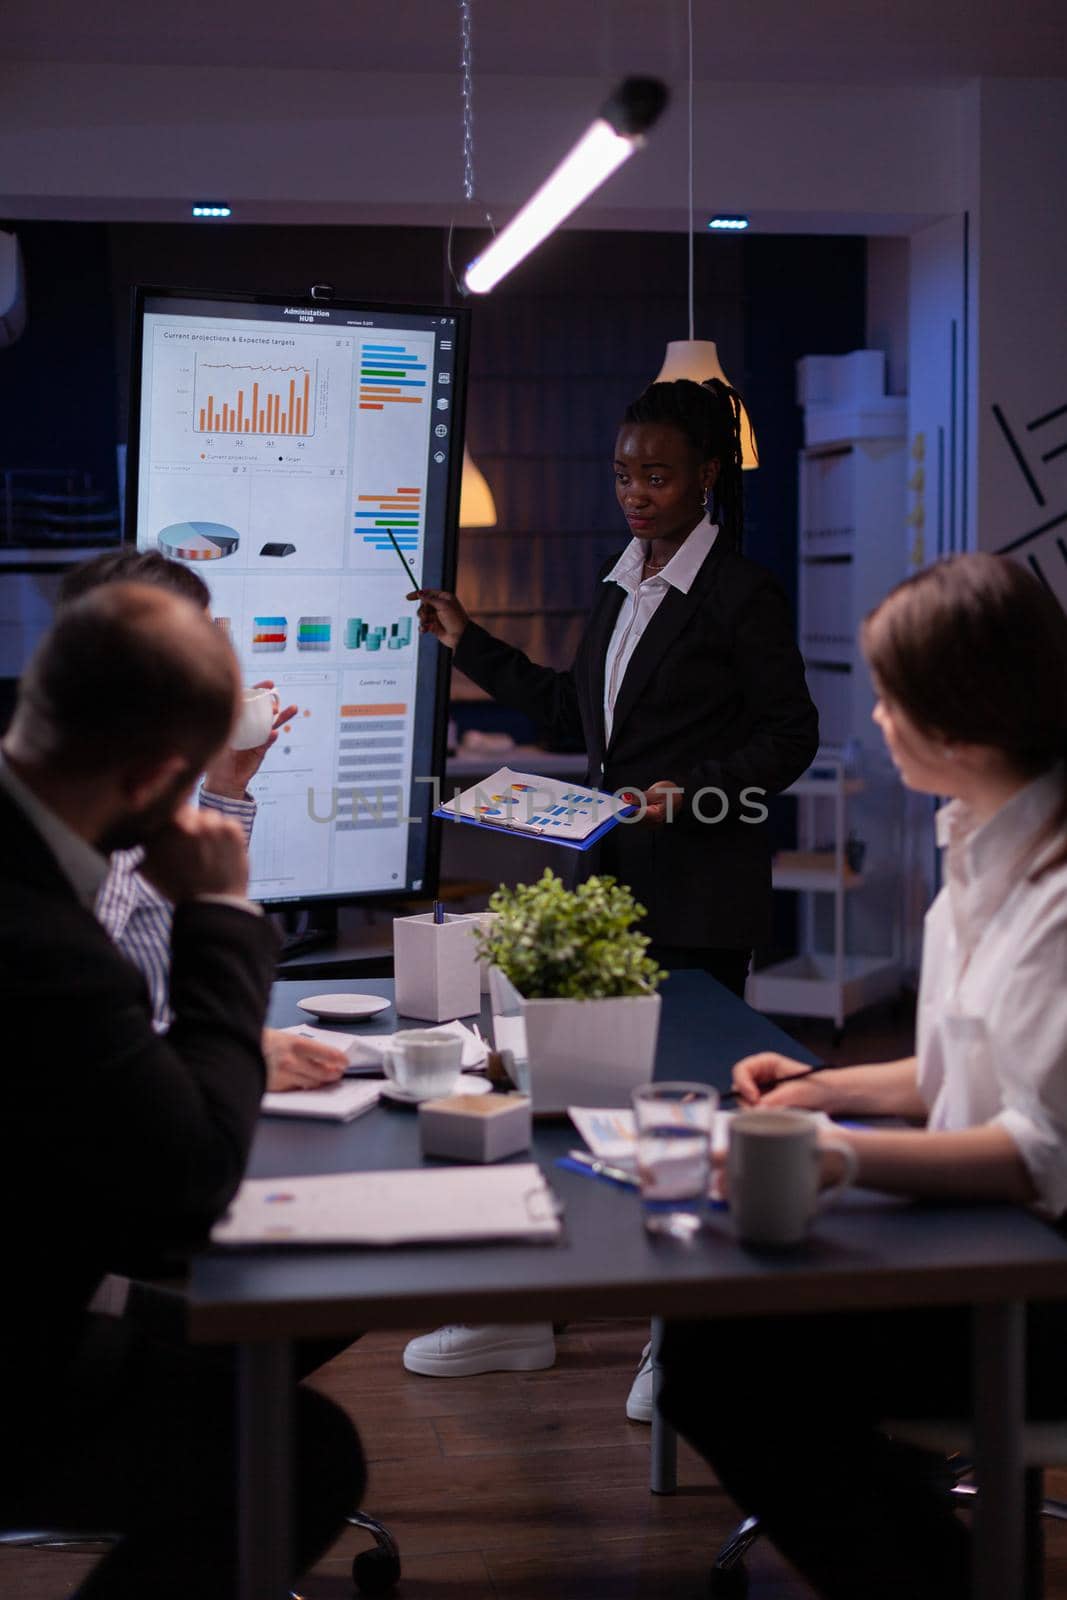 Businesswoman with dark skin explaining financial graphs using presentation monitor overworking in company meeting room in evening. Workaholics multi-ethnic teamwork solving statistics at night